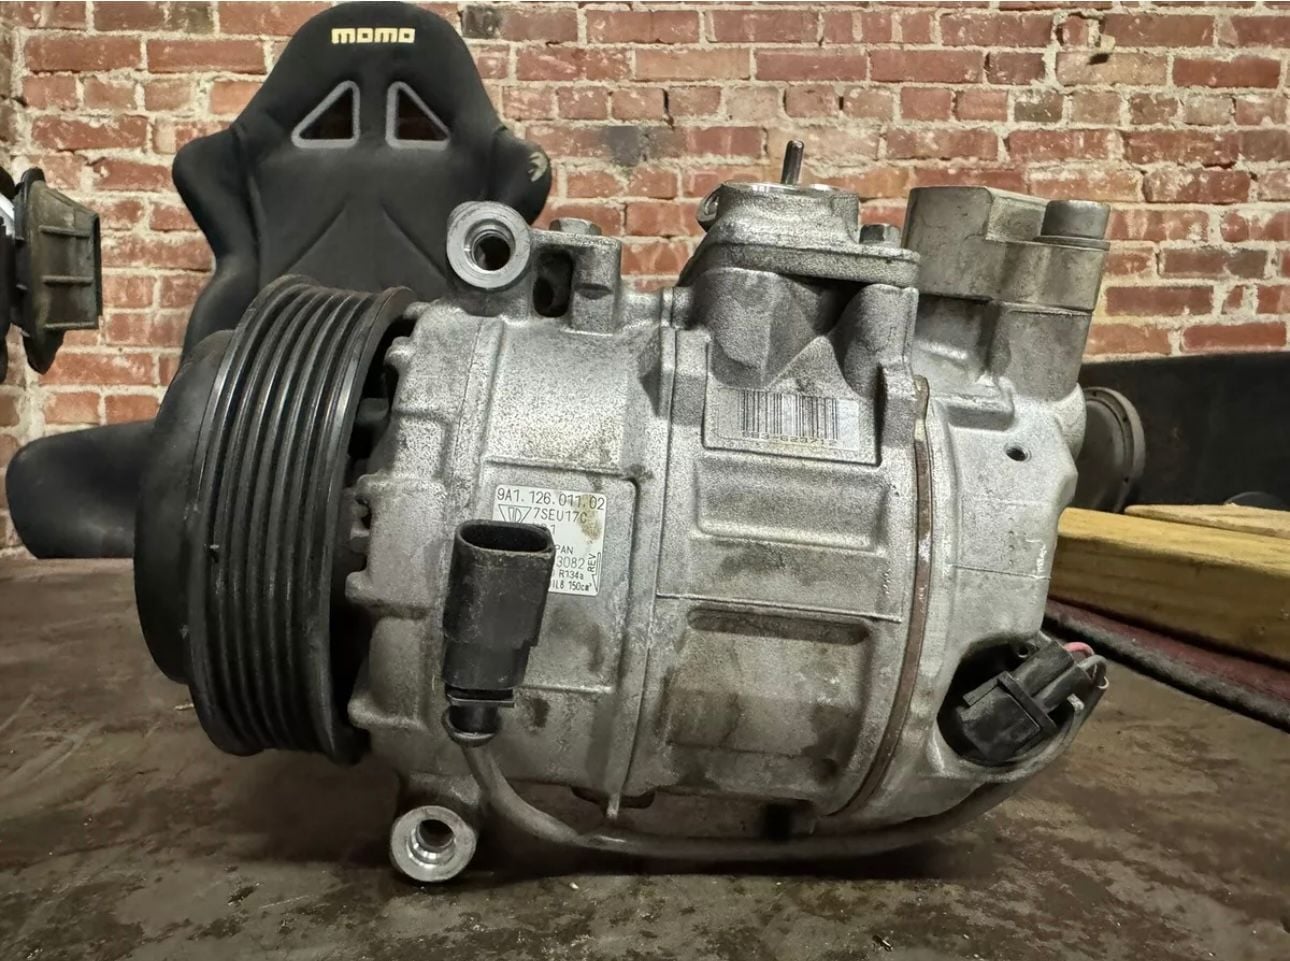 Accessories - Porsche Cayman 981 Cayman OEM A/C Air Conditioning Compressor - Used - 2009 to 2016 Porsche Cayman - El Paso, TX 79912, United States